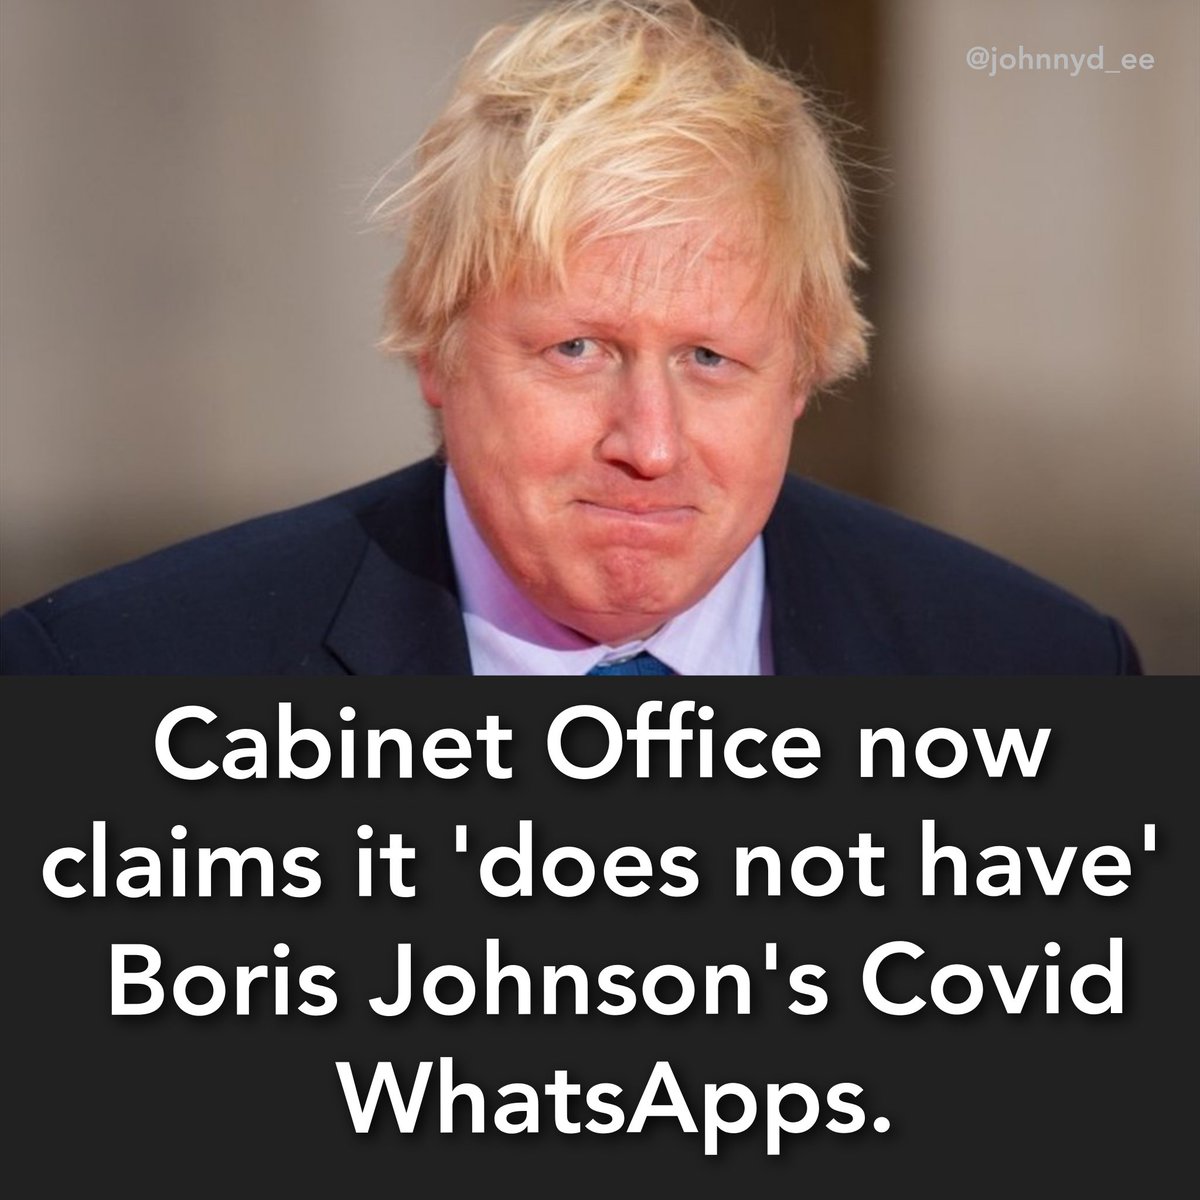 🚨 Clearly the #Tories have a lot to hide, so maybe now it's time the @metpoliceuk were involved. 

Criminals, the bloody lot of them! 

#PartyGate #BorisJohnson #BorisTheLiar #ToryLiars #ToriesUnfitToGovern #ToriesCorruptToTheCore #ToriesOut #ToriesOut327